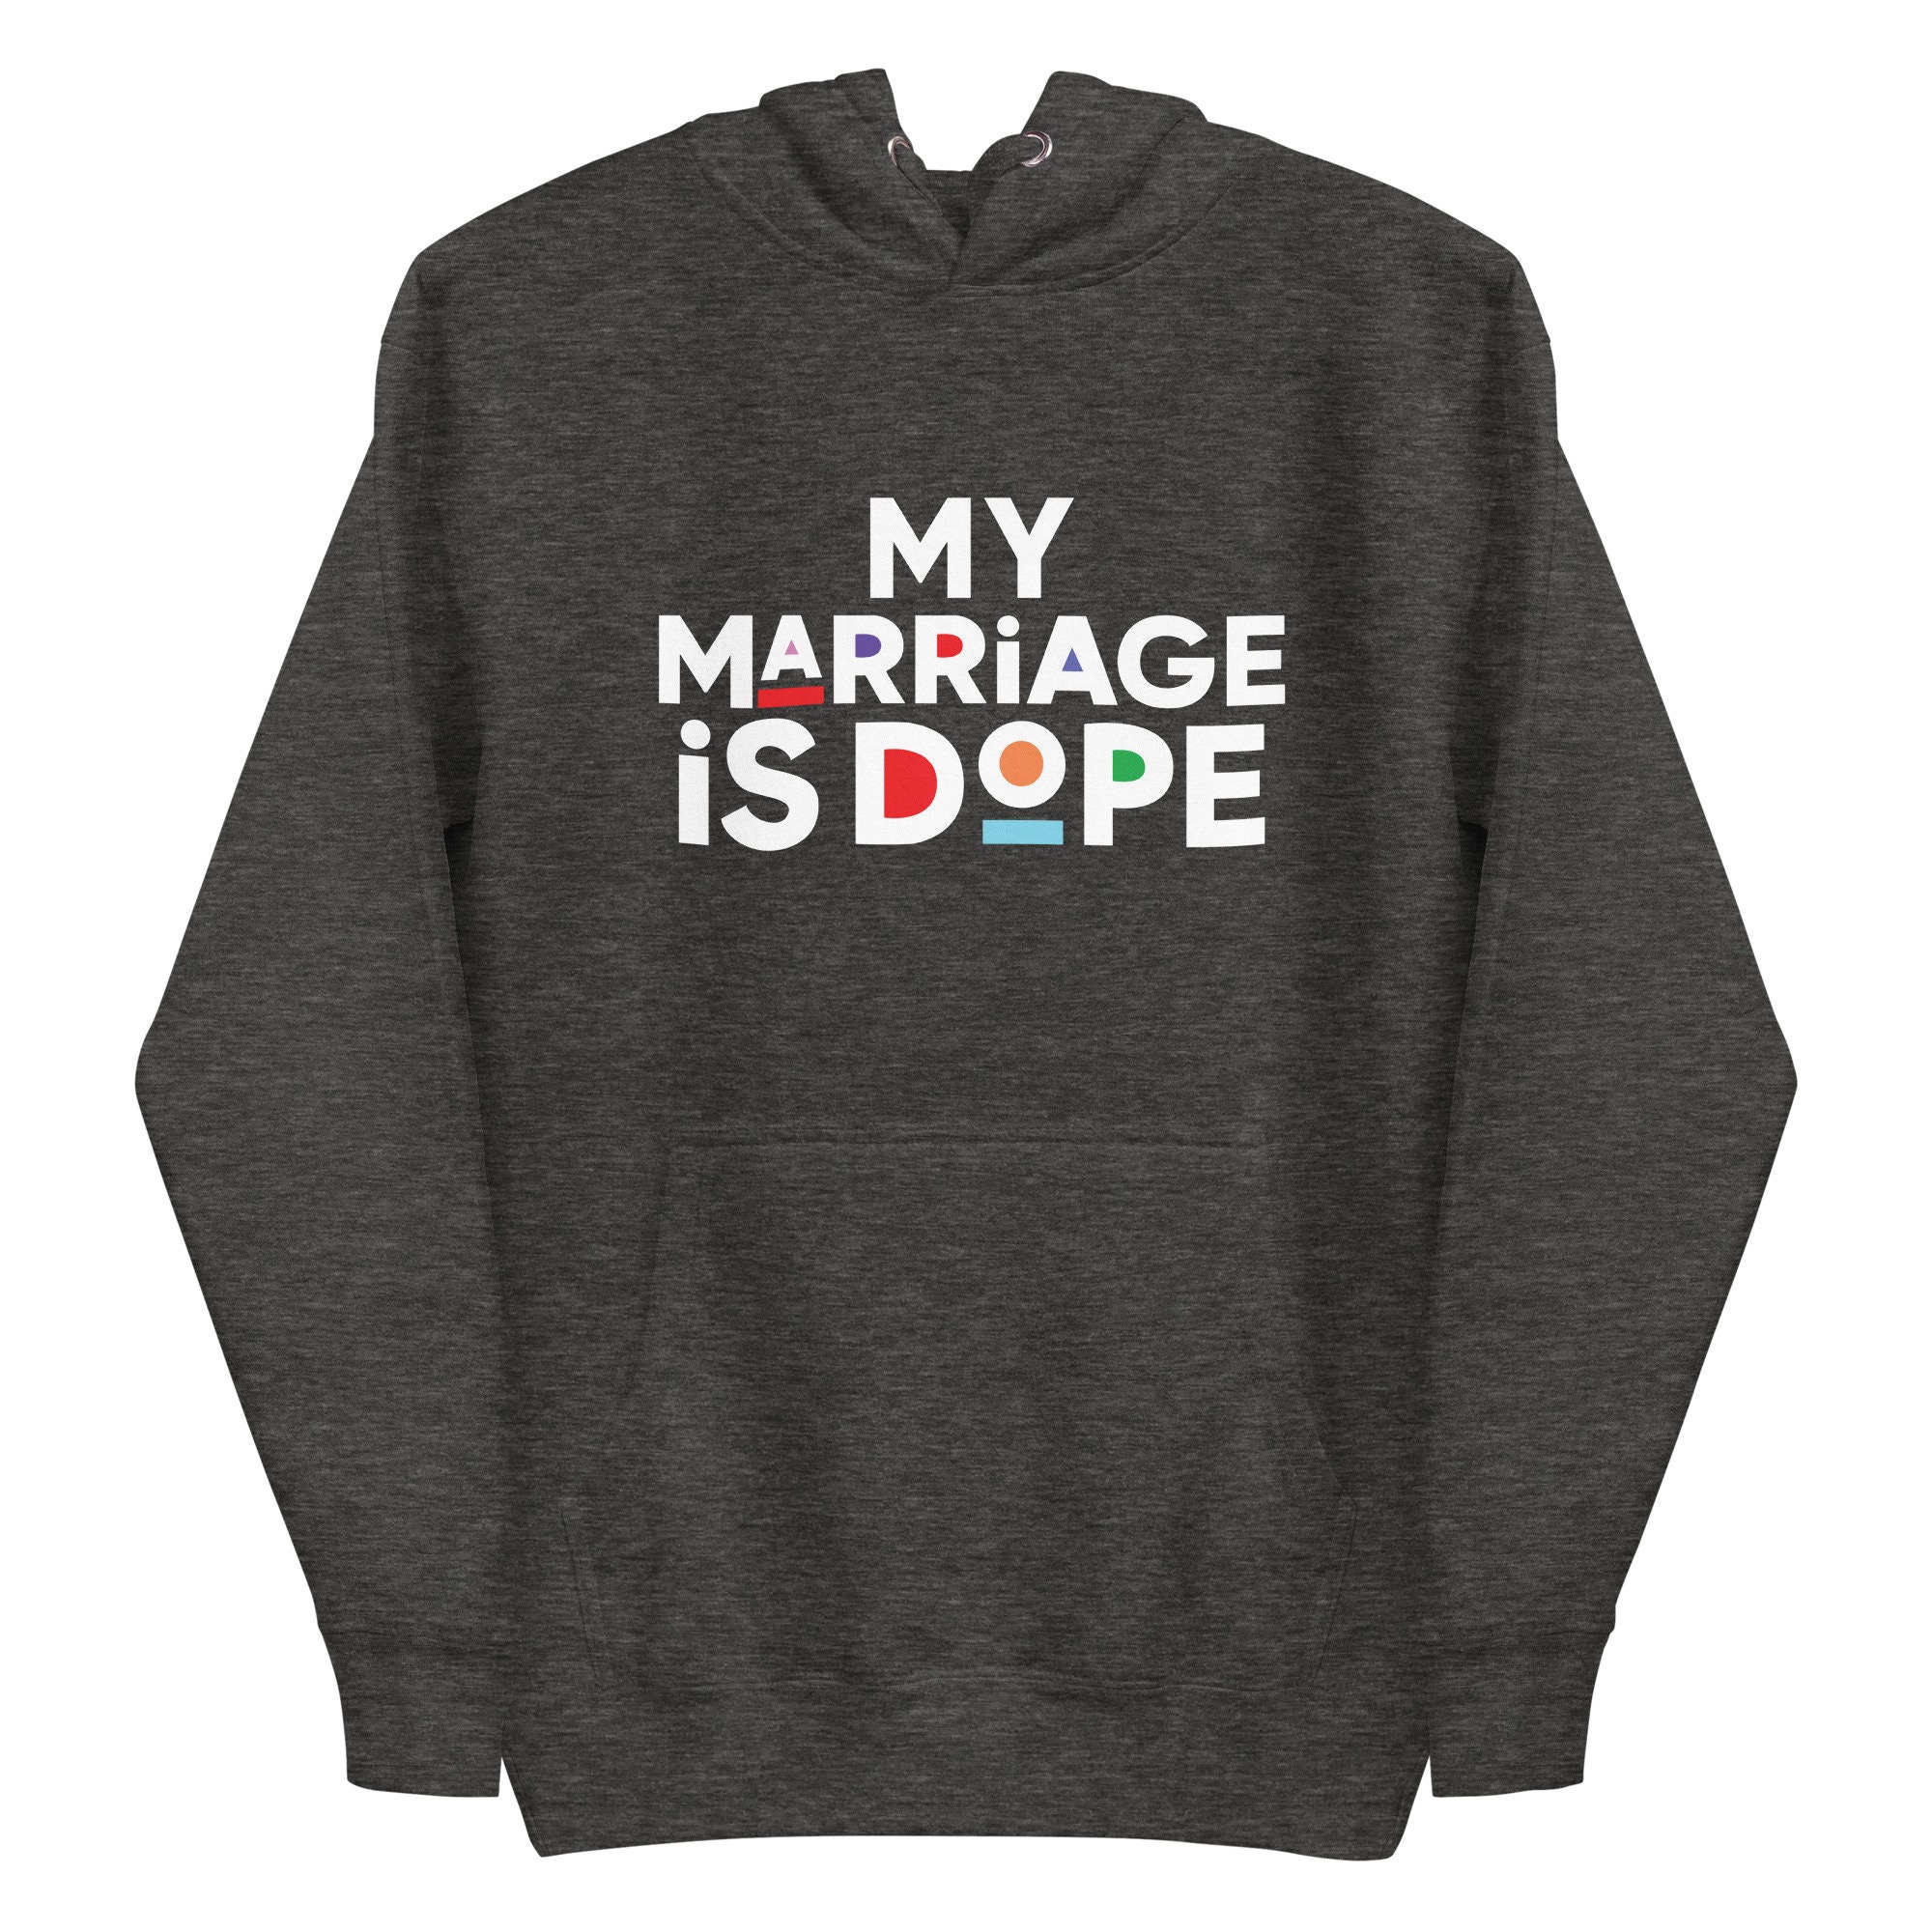 Stupid Lover Black Cute Matching Couple Gift Hoodies Pullover Top